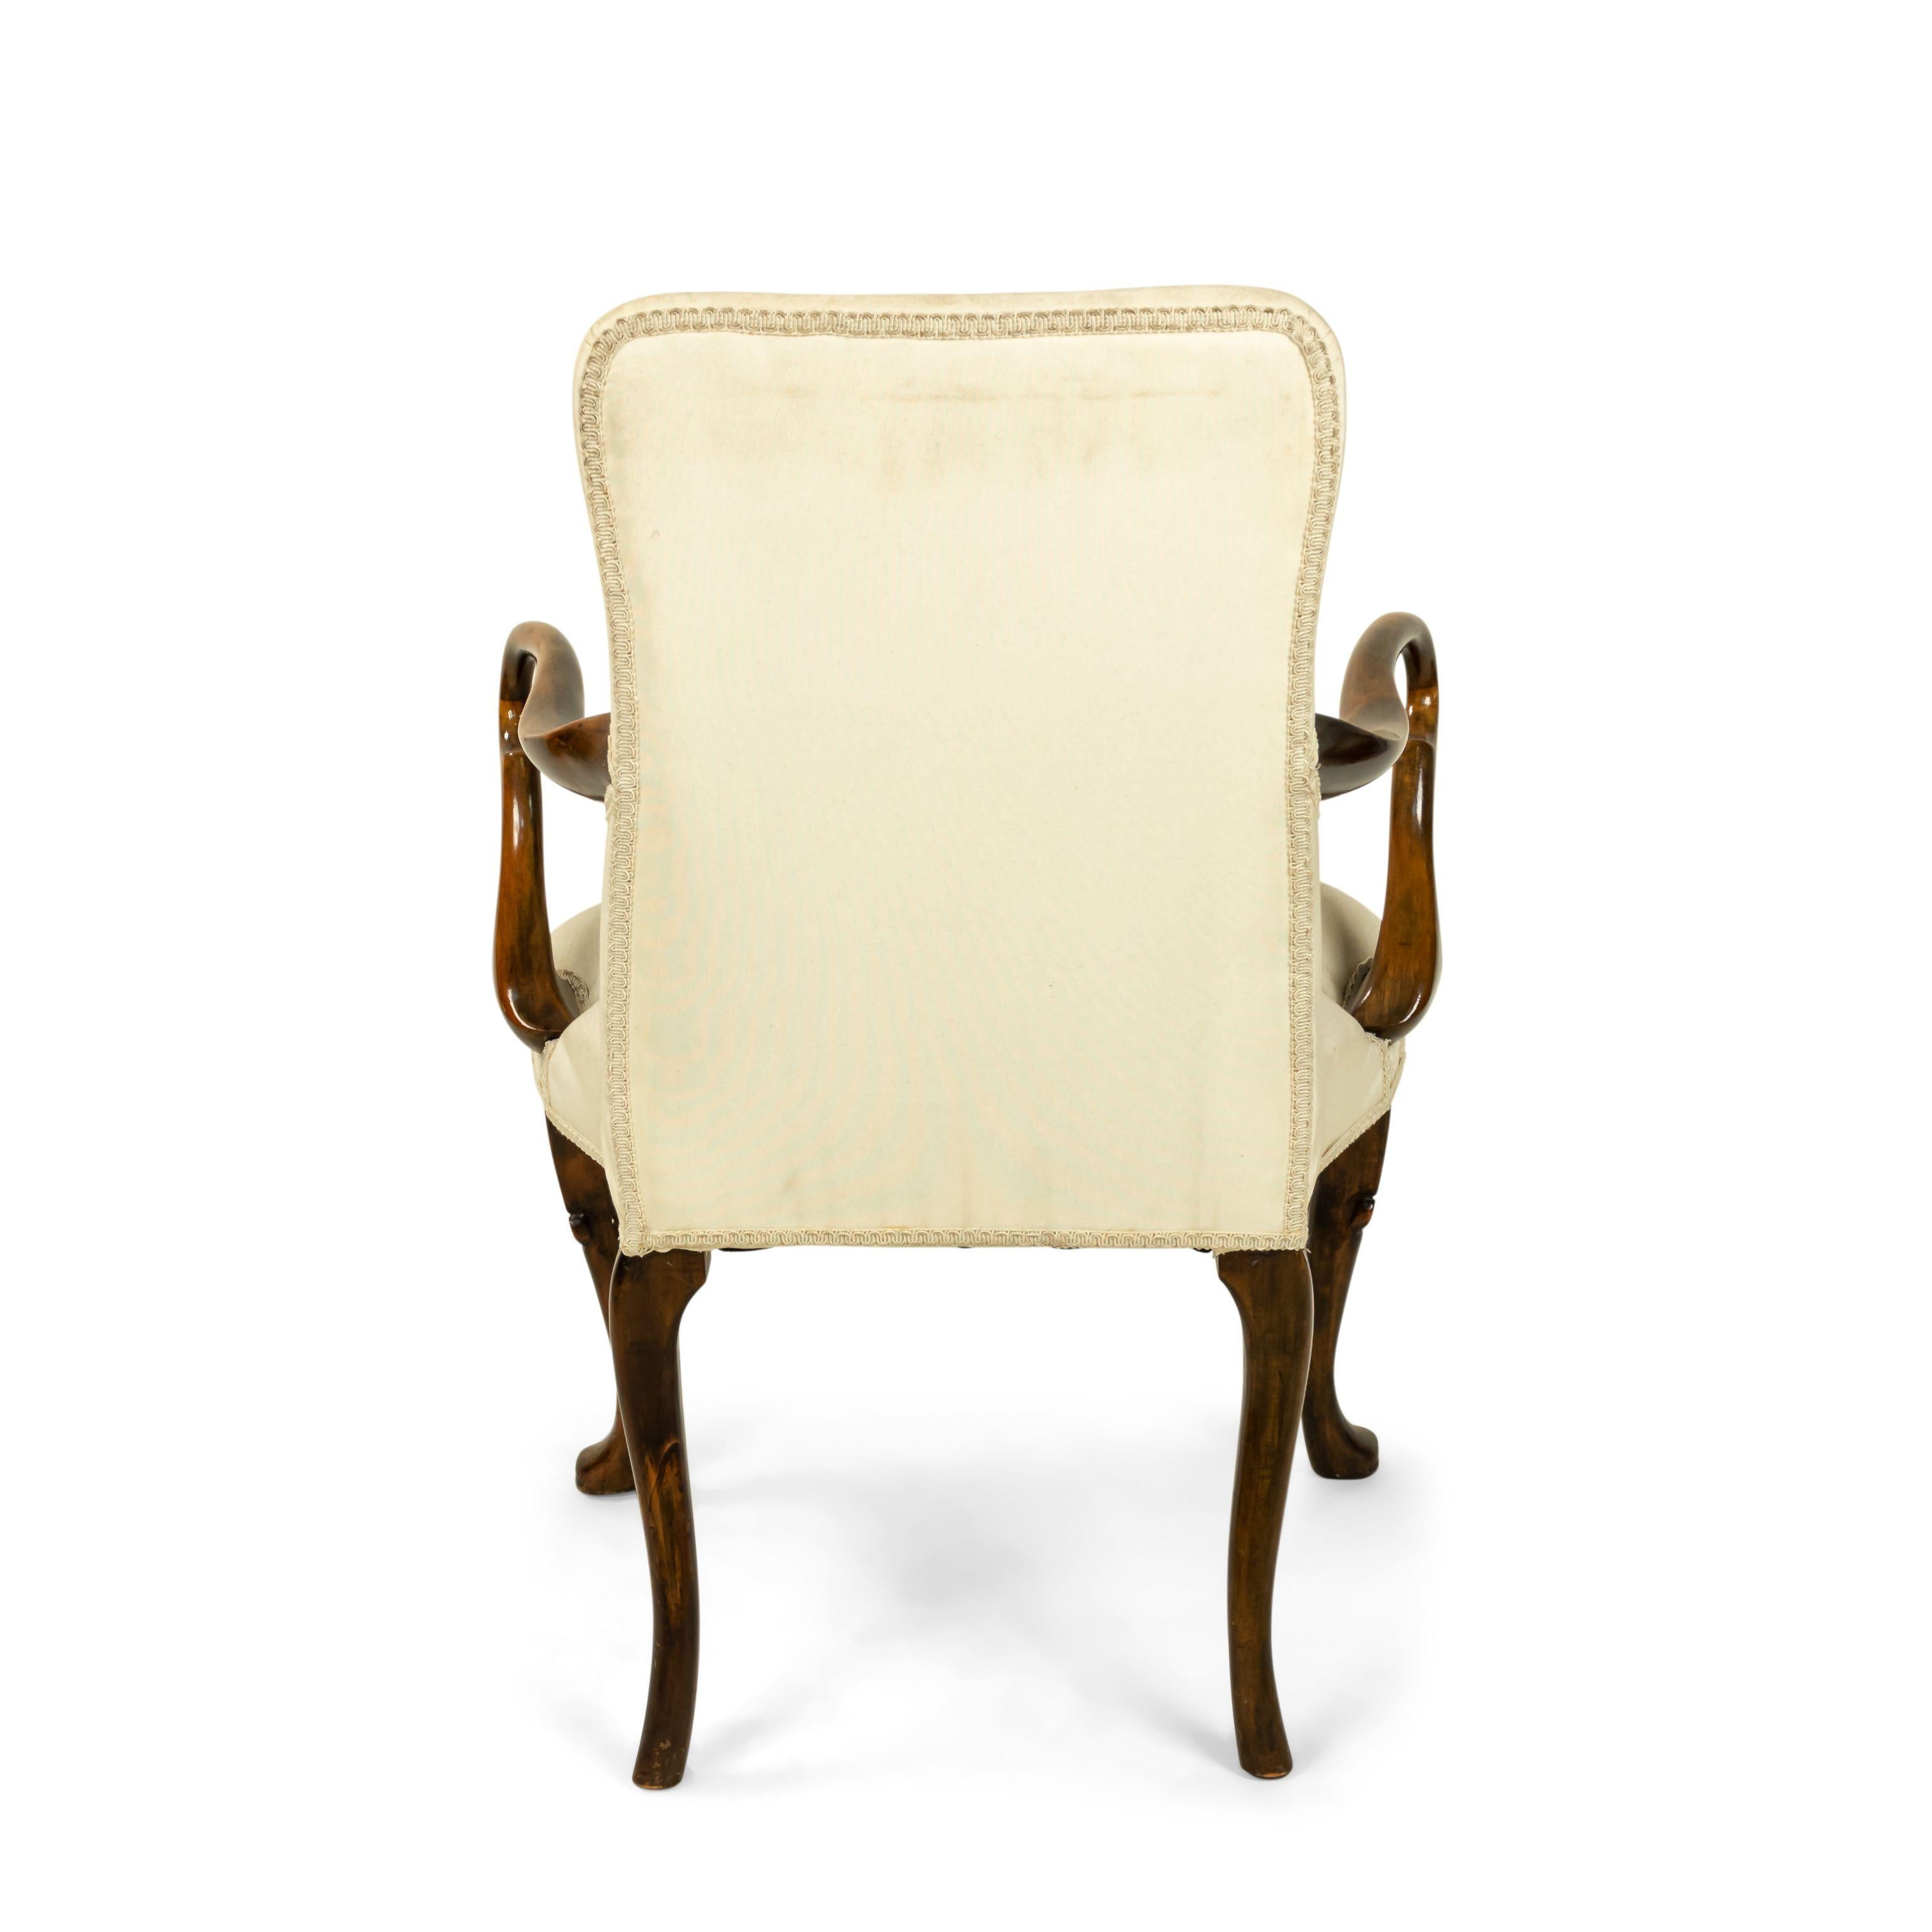 Queen Anne White Upholstered Walnut Arm Chair In Good Condition For Sale In New York, NY